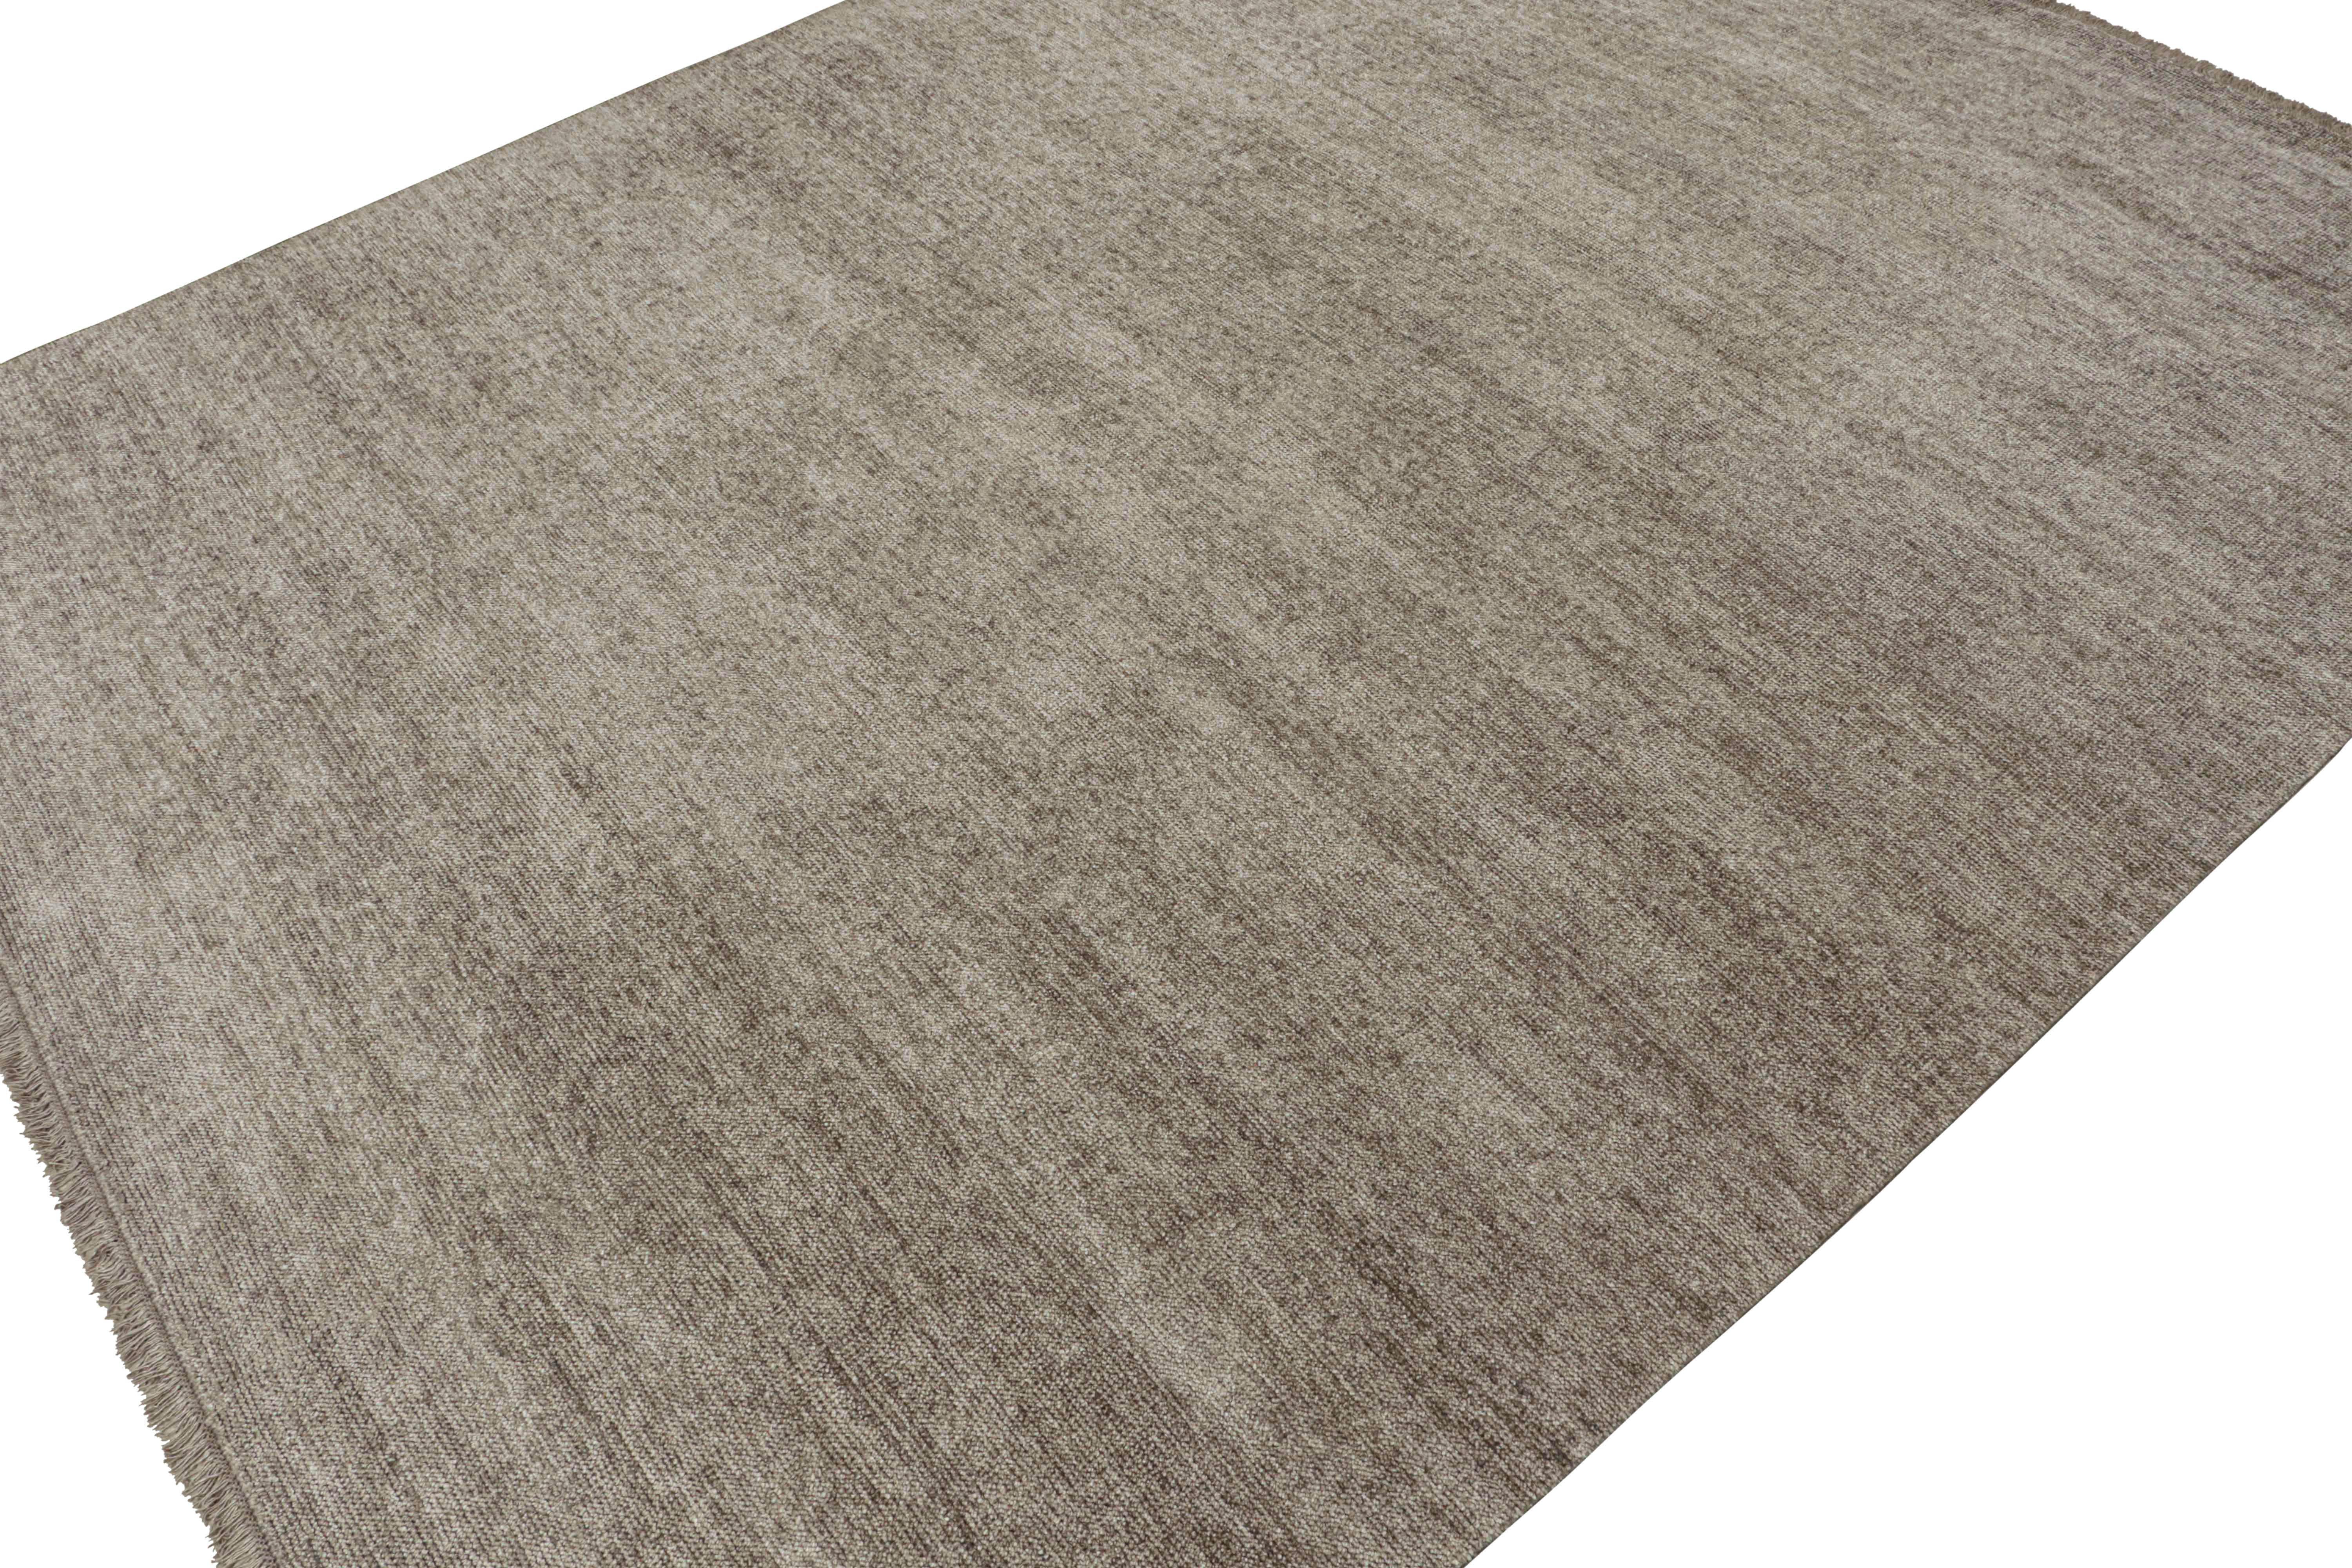 Indian Rug & Kilim’s Modern rug in Solid Silver-Gray Tone-on-Tone Striae For Sale